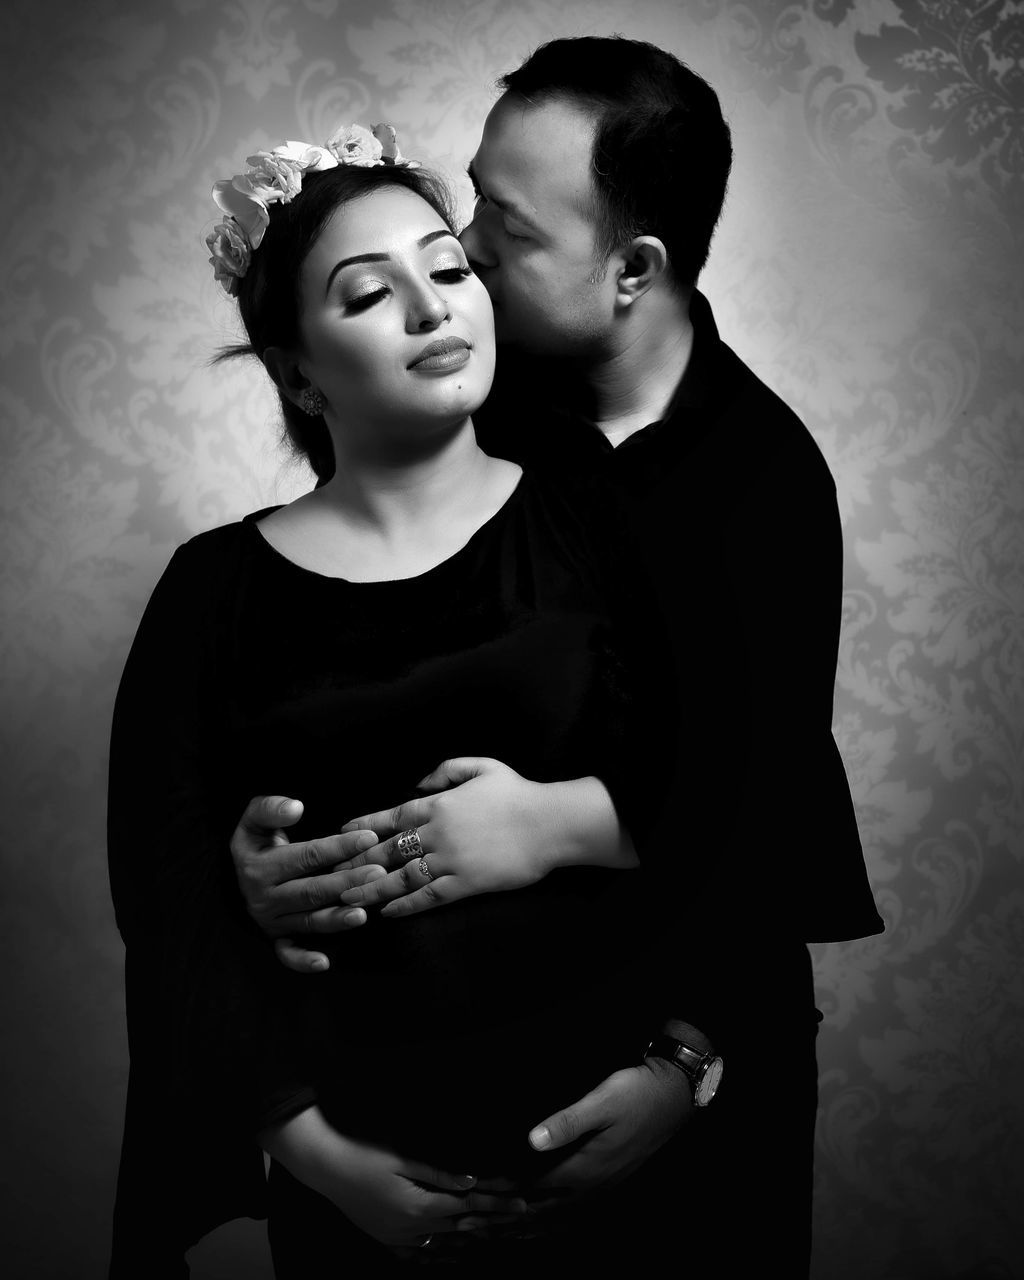 black and white, two people, adult, women, love, togetherness, monochrome photography, black, emotion, indoors, men, female, positive emotion, monochrome, young adult, person, studio shot, romance, bonding, portrait, affectionate, standing, embracing, waist up, human face, child, happiness, lifestyles